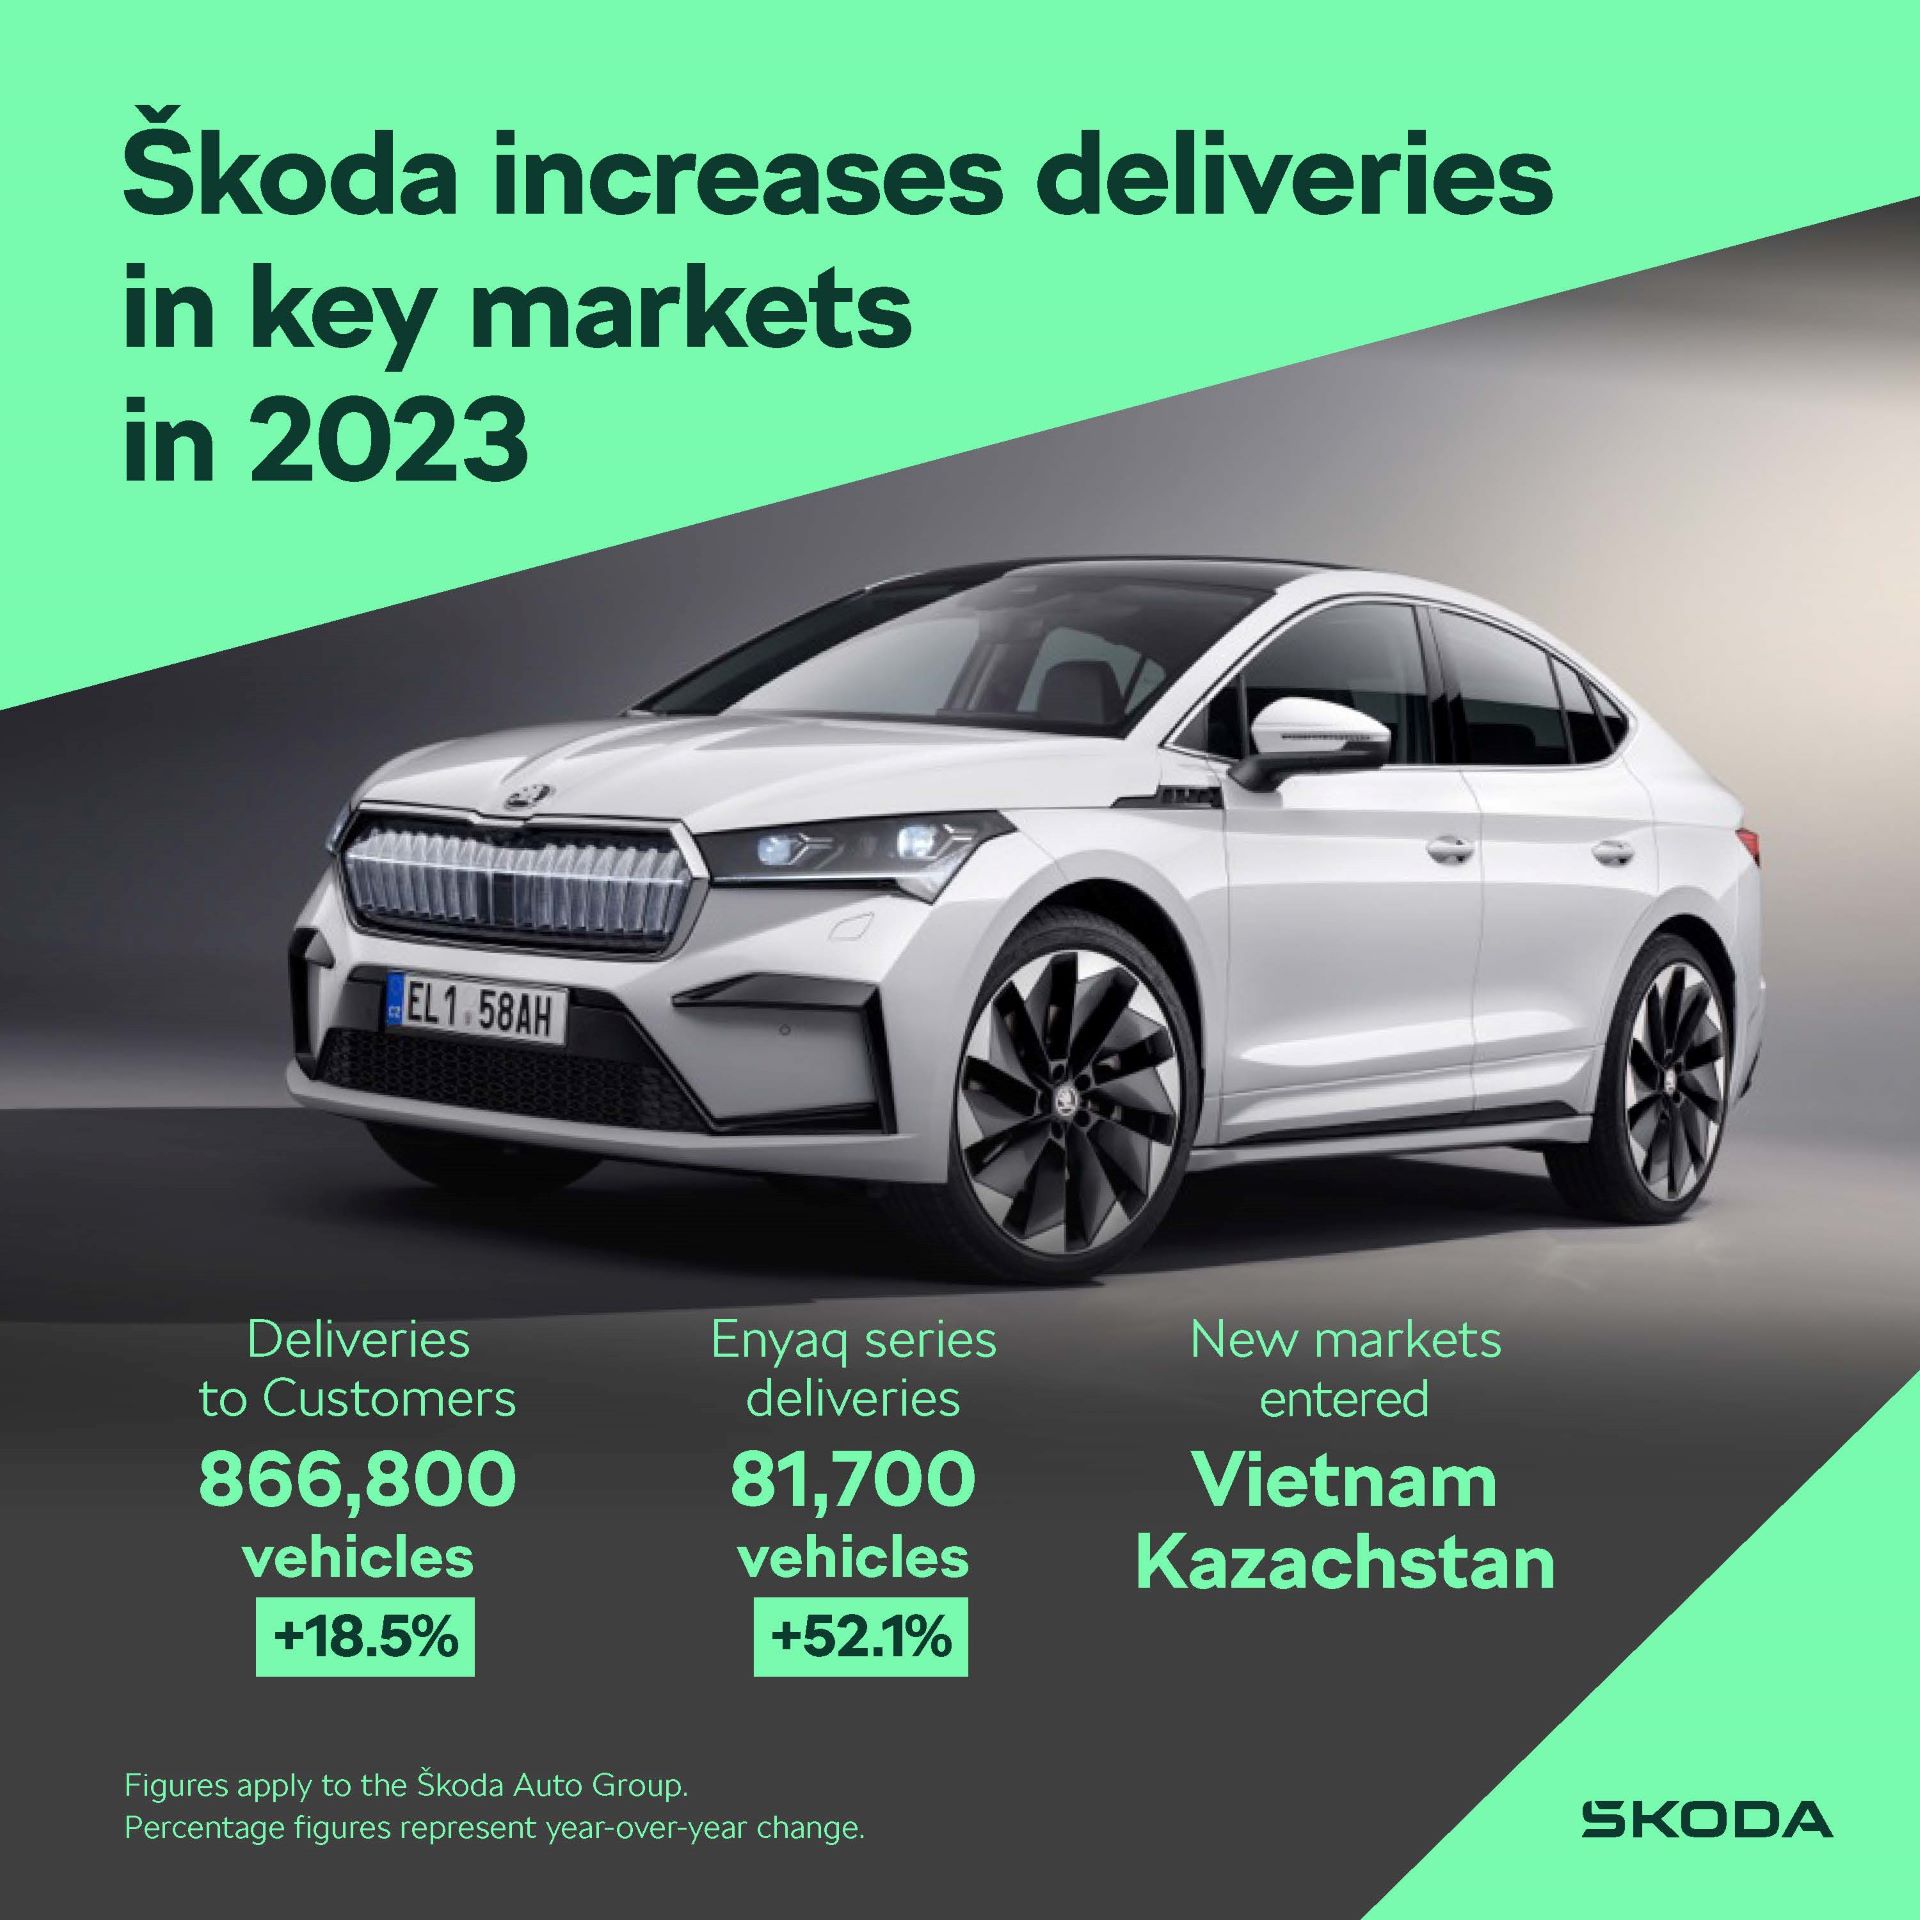 Škoda Auto delivers 866,800 vehicles worldwide in 2023 and achieves record UK market share